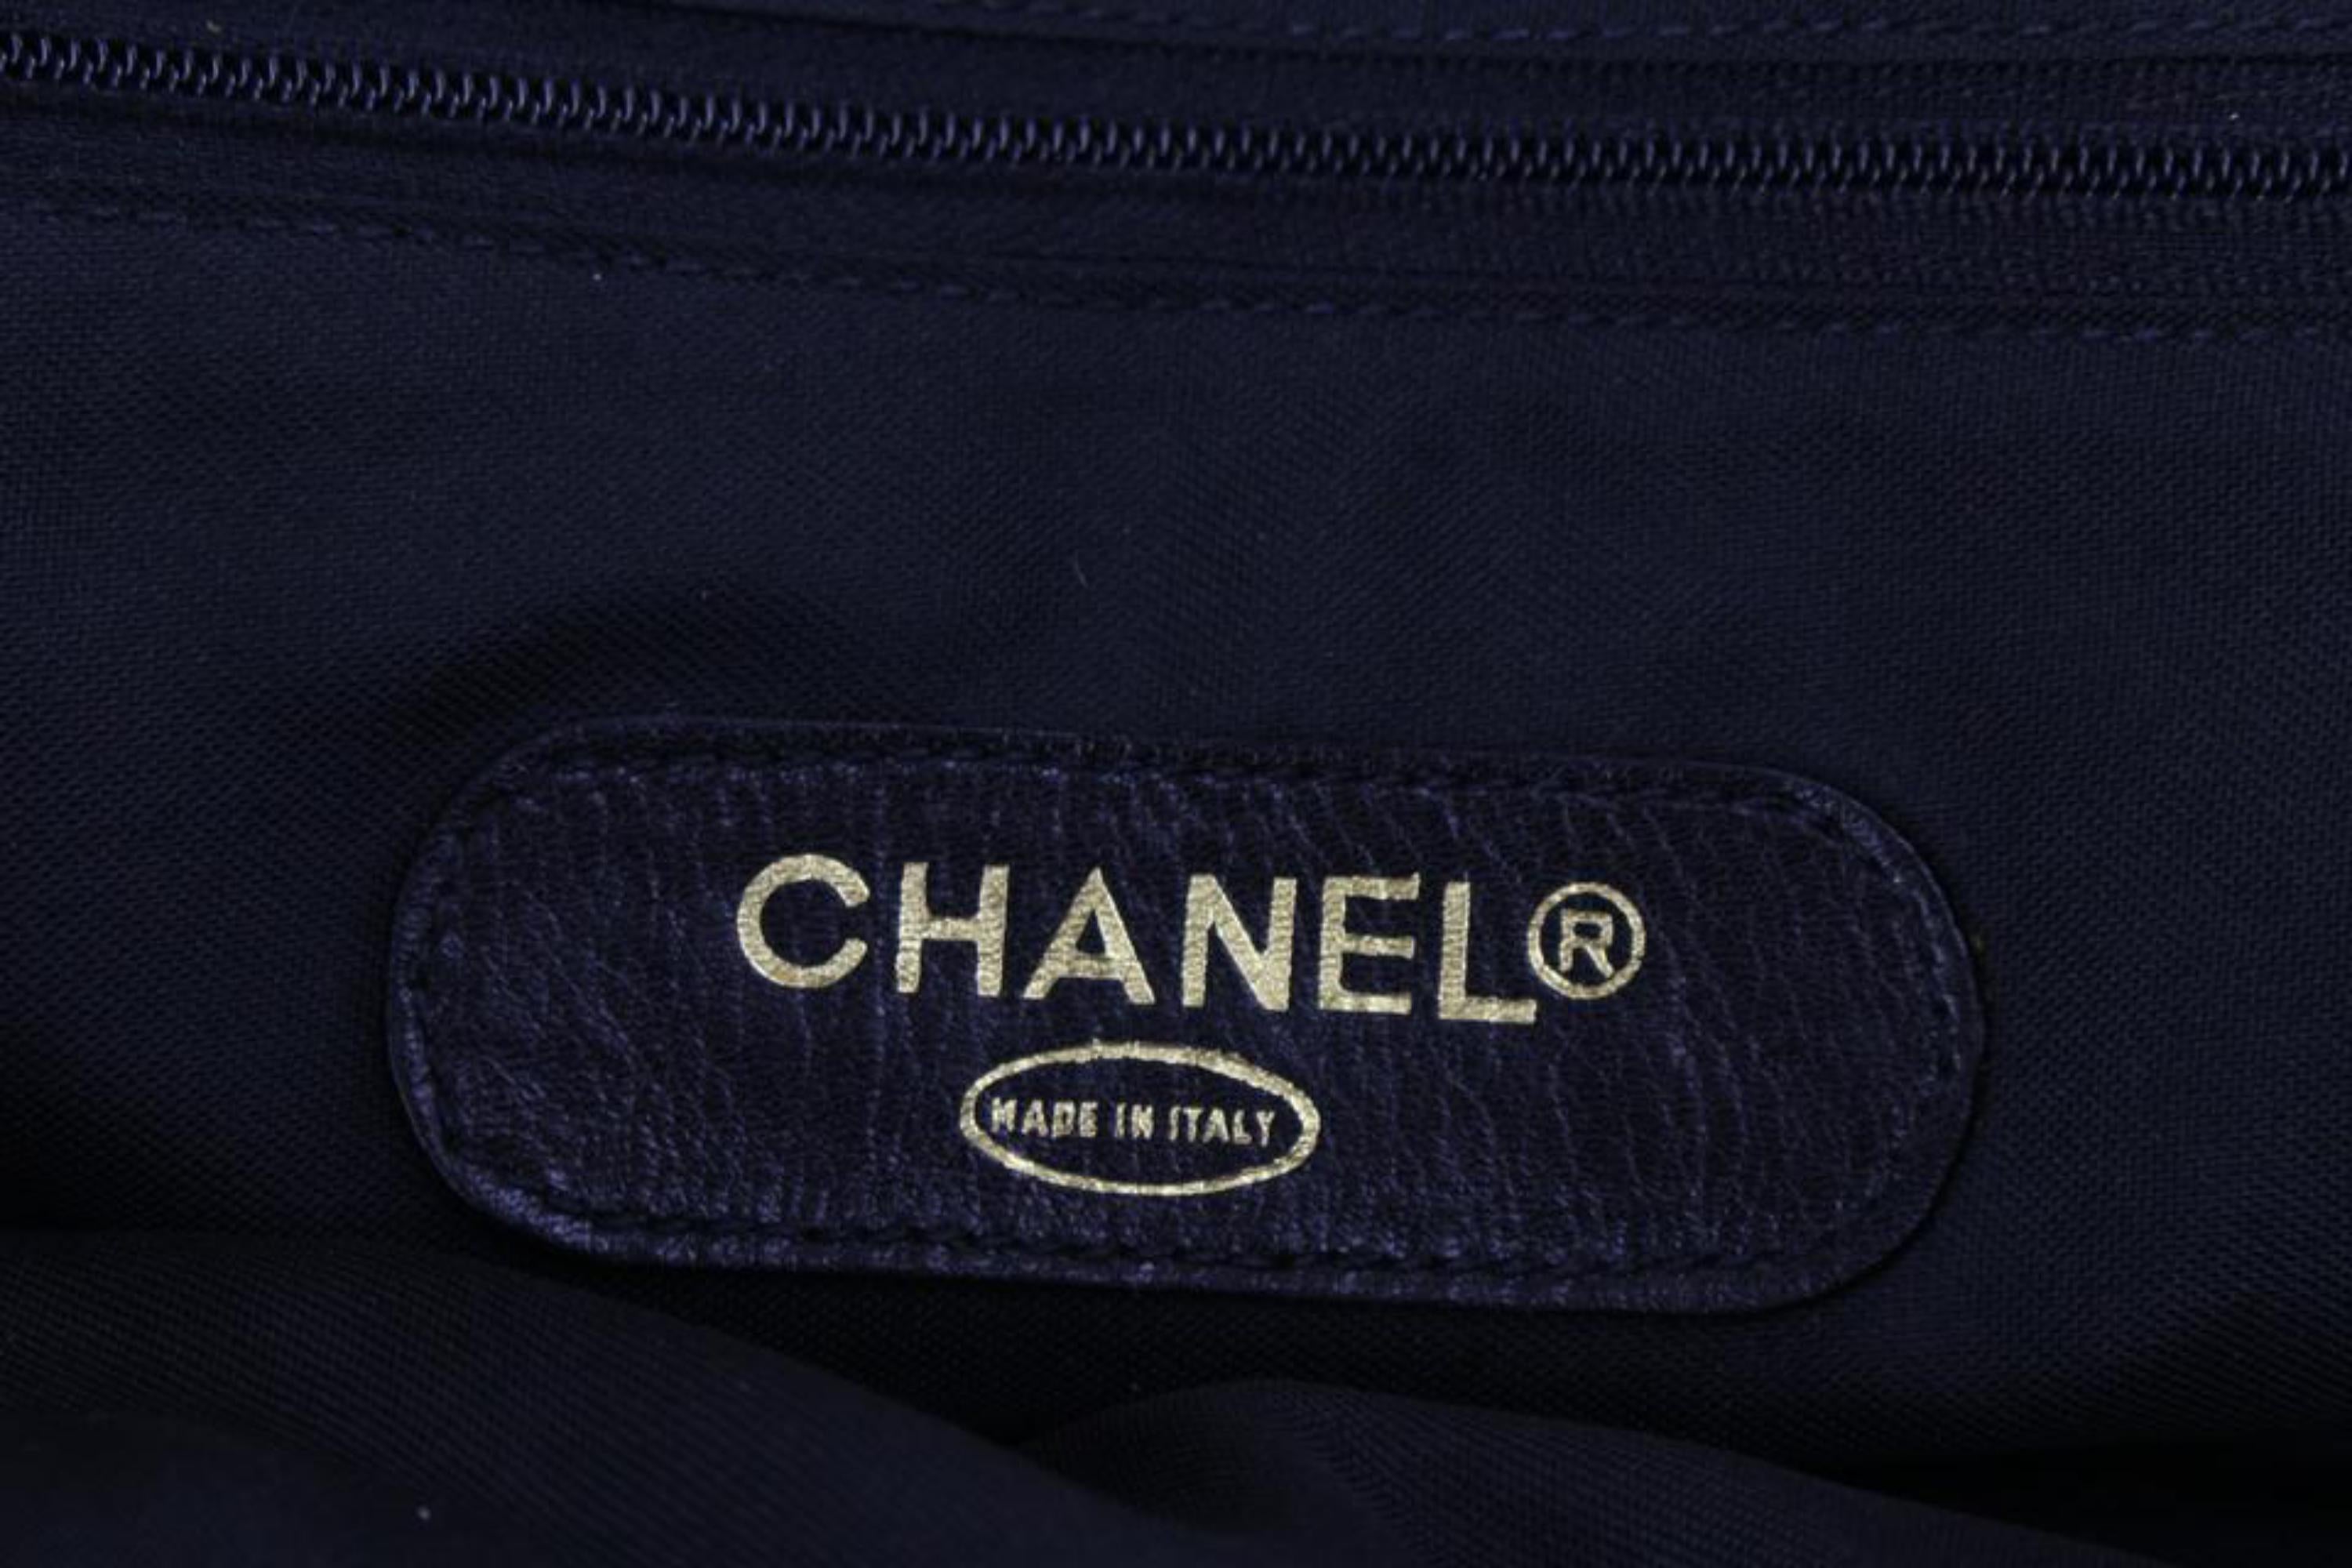 Chanel Black Quilted Lambskin Boston Duffle with Strap 1116c43 1